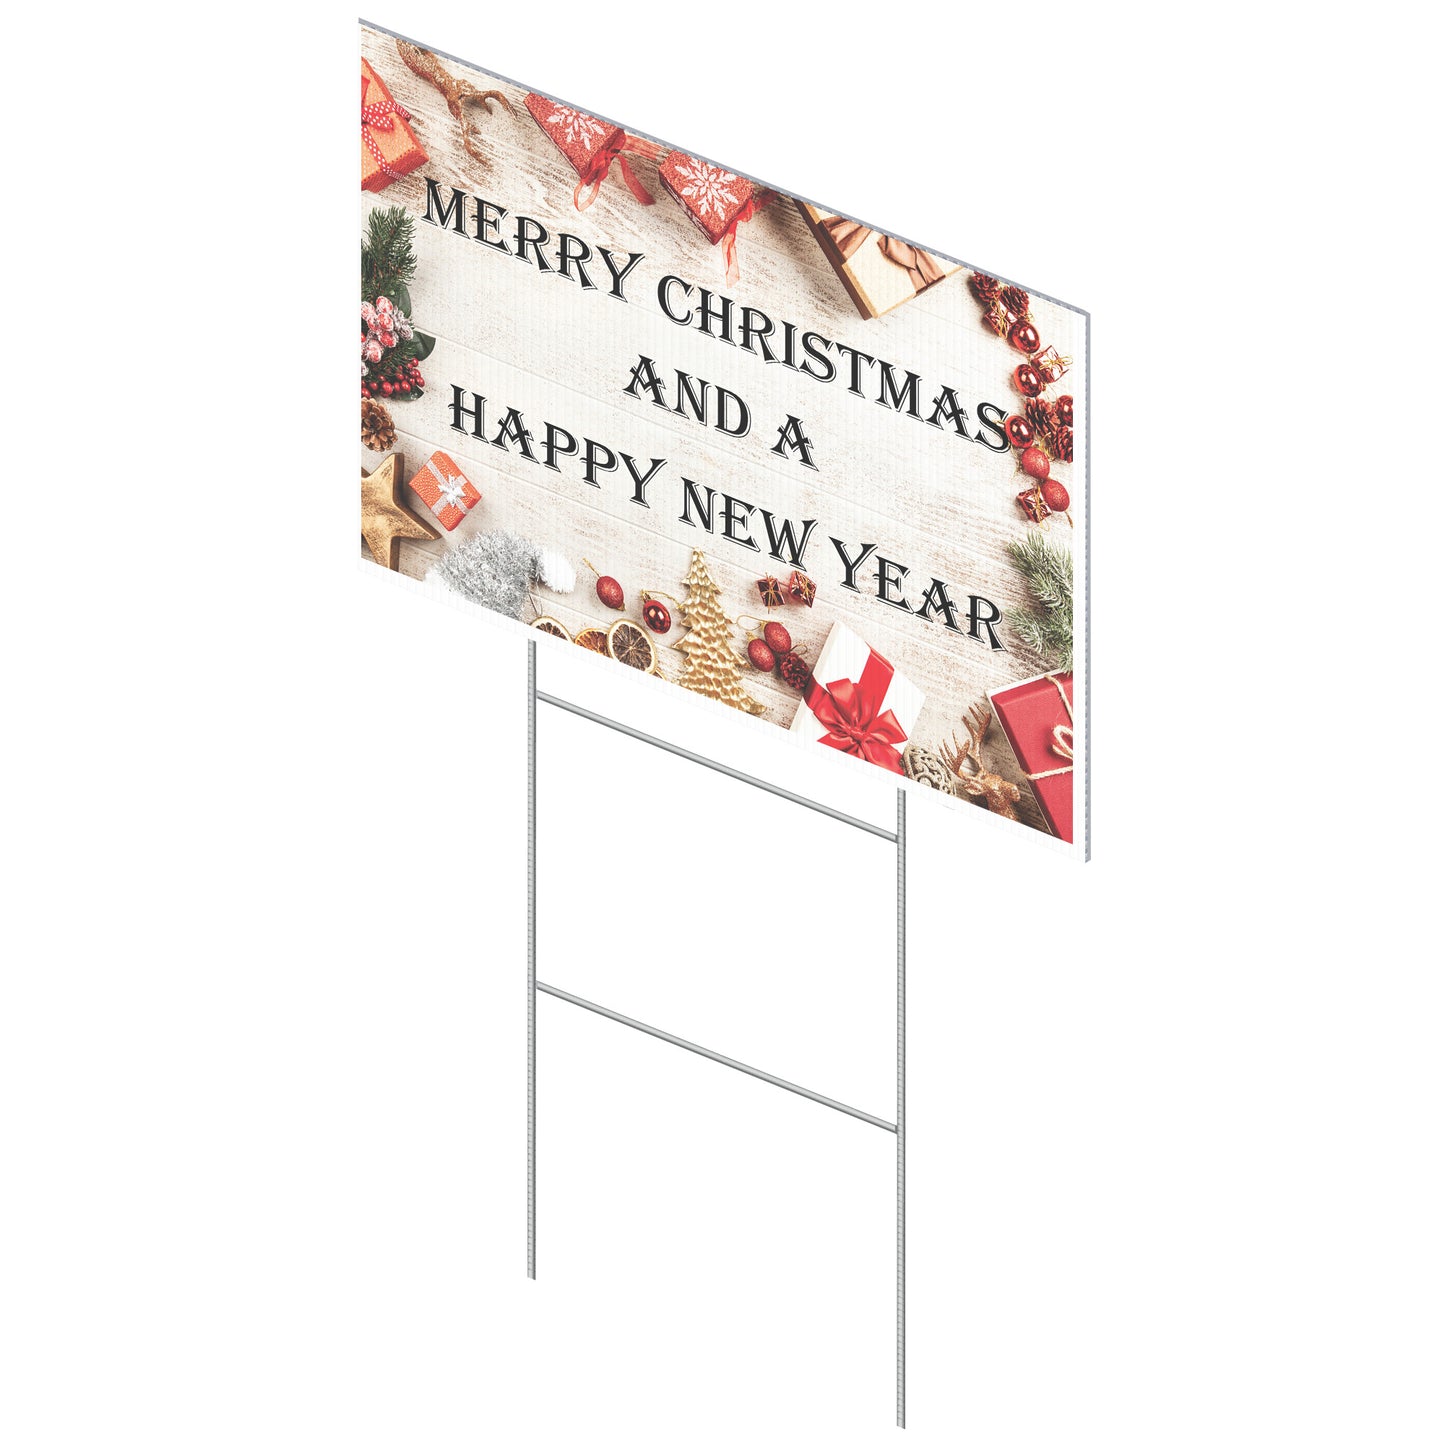 Merry Christmas and a Happy New Year Lettering Yard Sign - Signs and Seasons Gifts